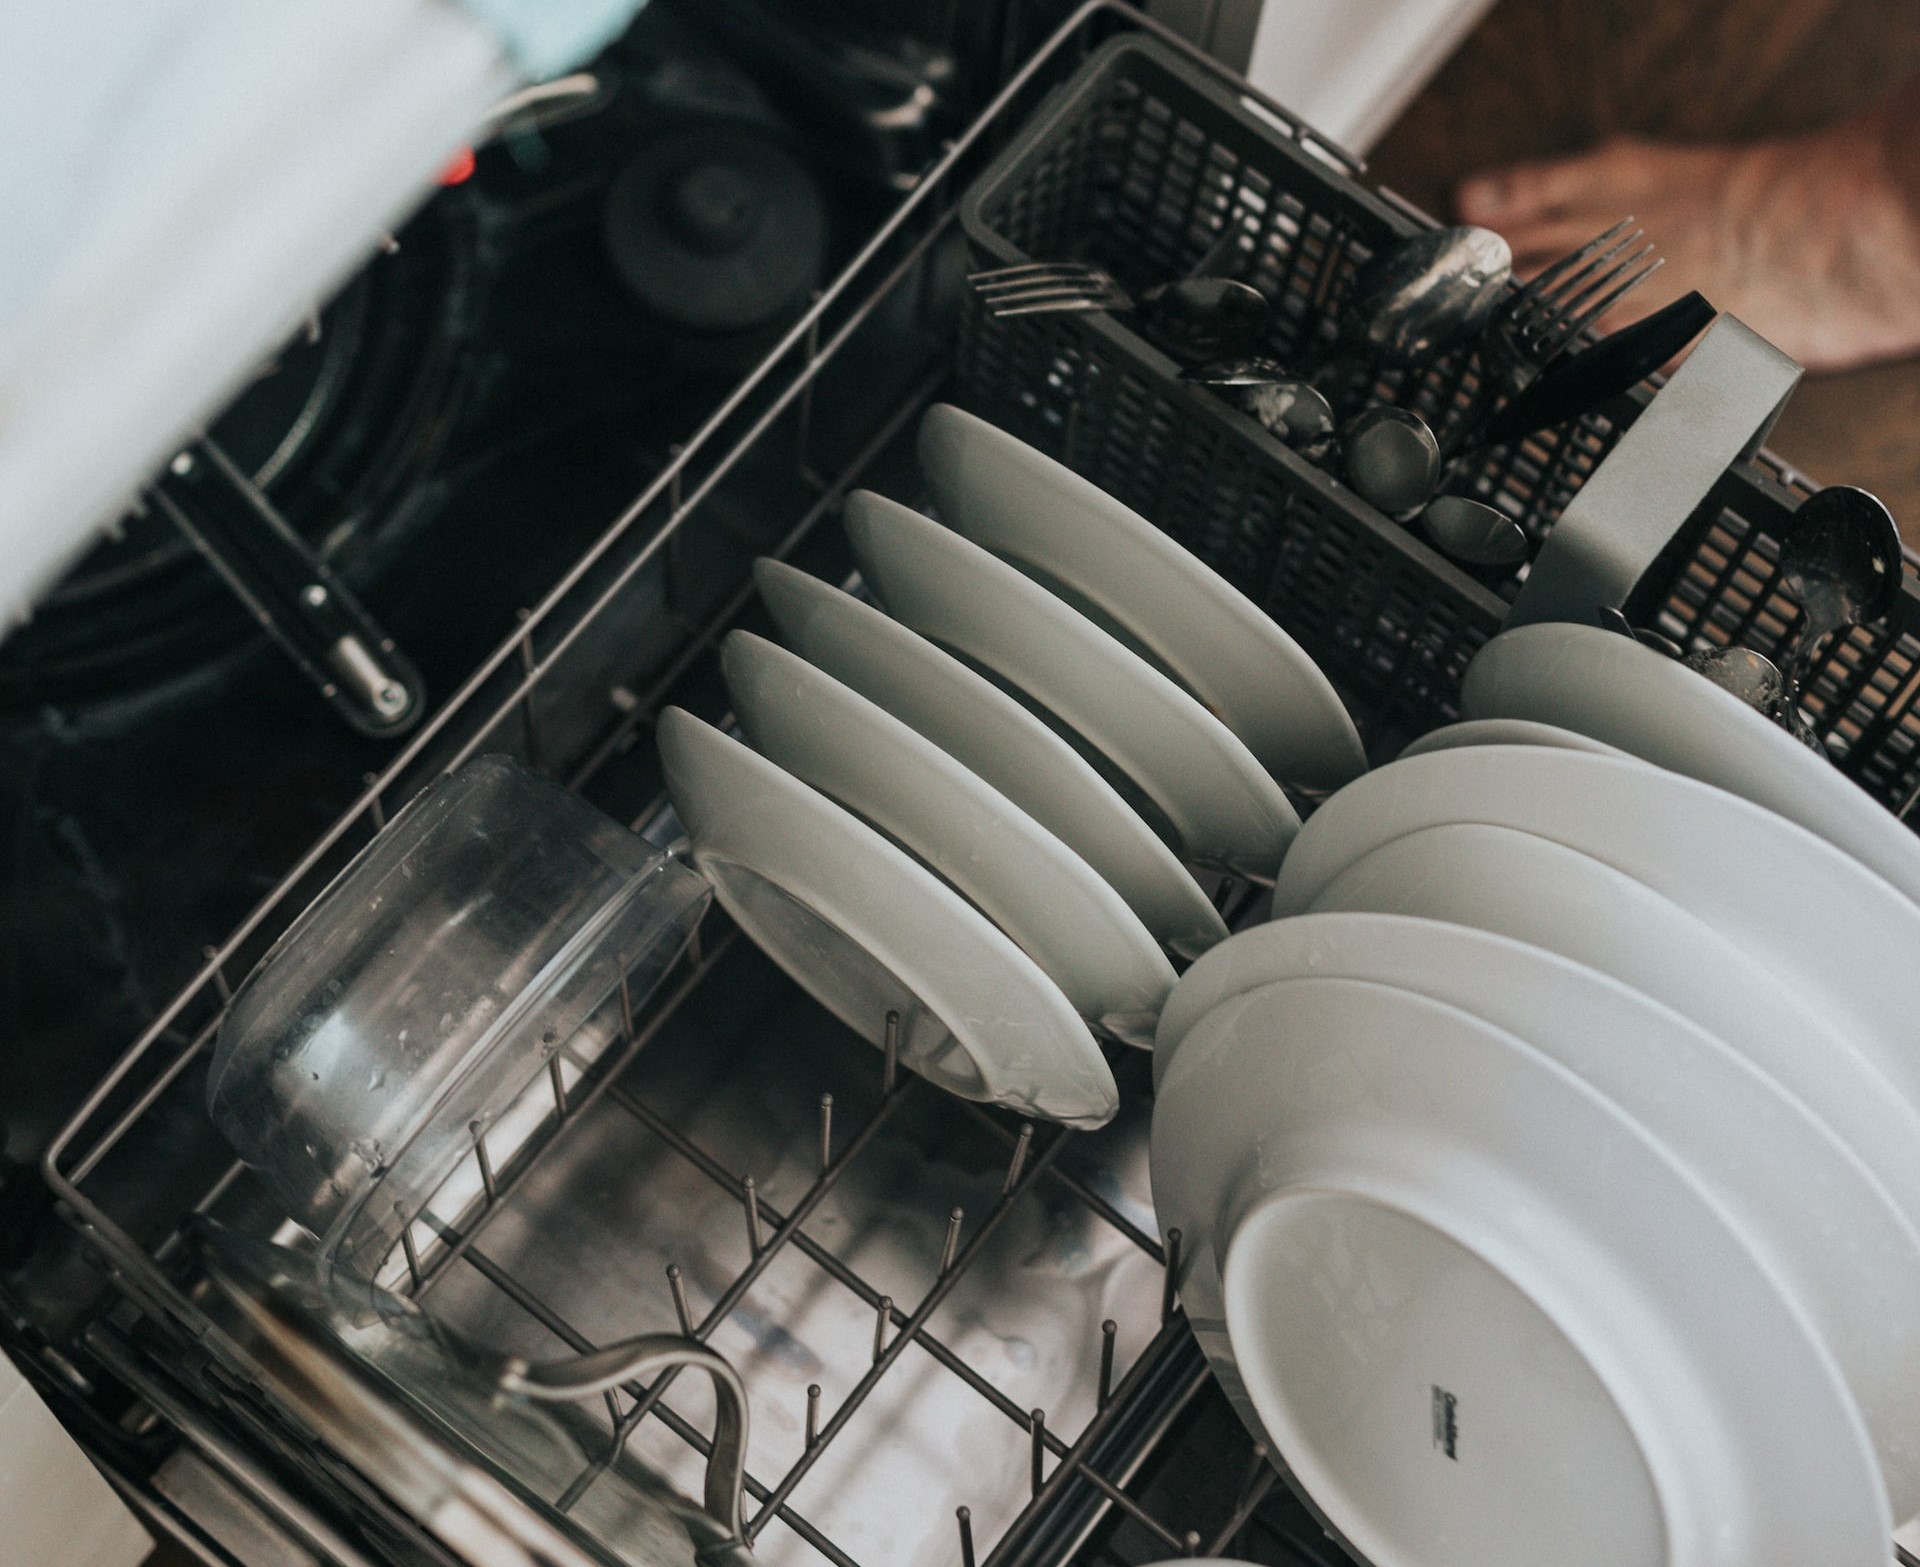 Unusual uses of a dishwasher for washing dishes